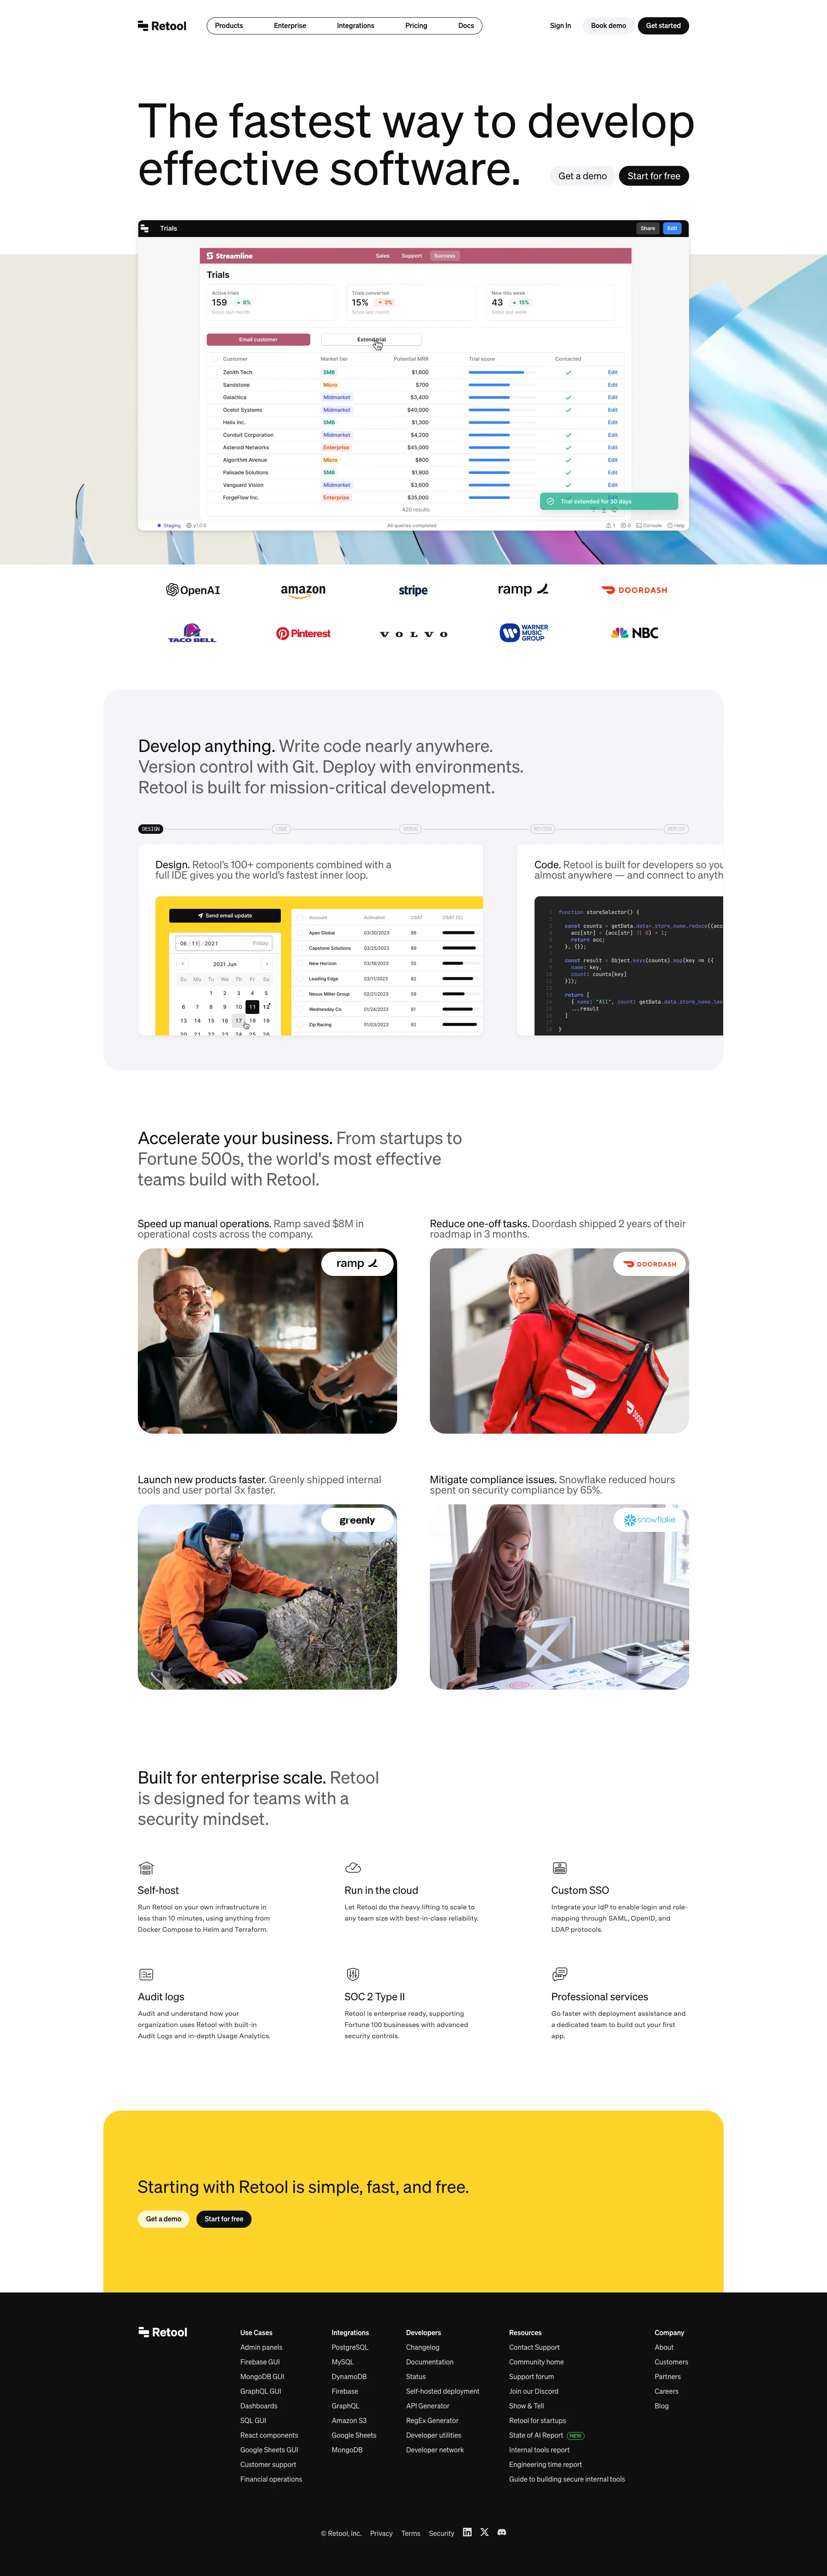 Retool Landing Page Example: Retool is the fastest way to build effective business software. Use Retool's building blocks to develop apps and workflow automations that connect to your databases and APIs, instantly.